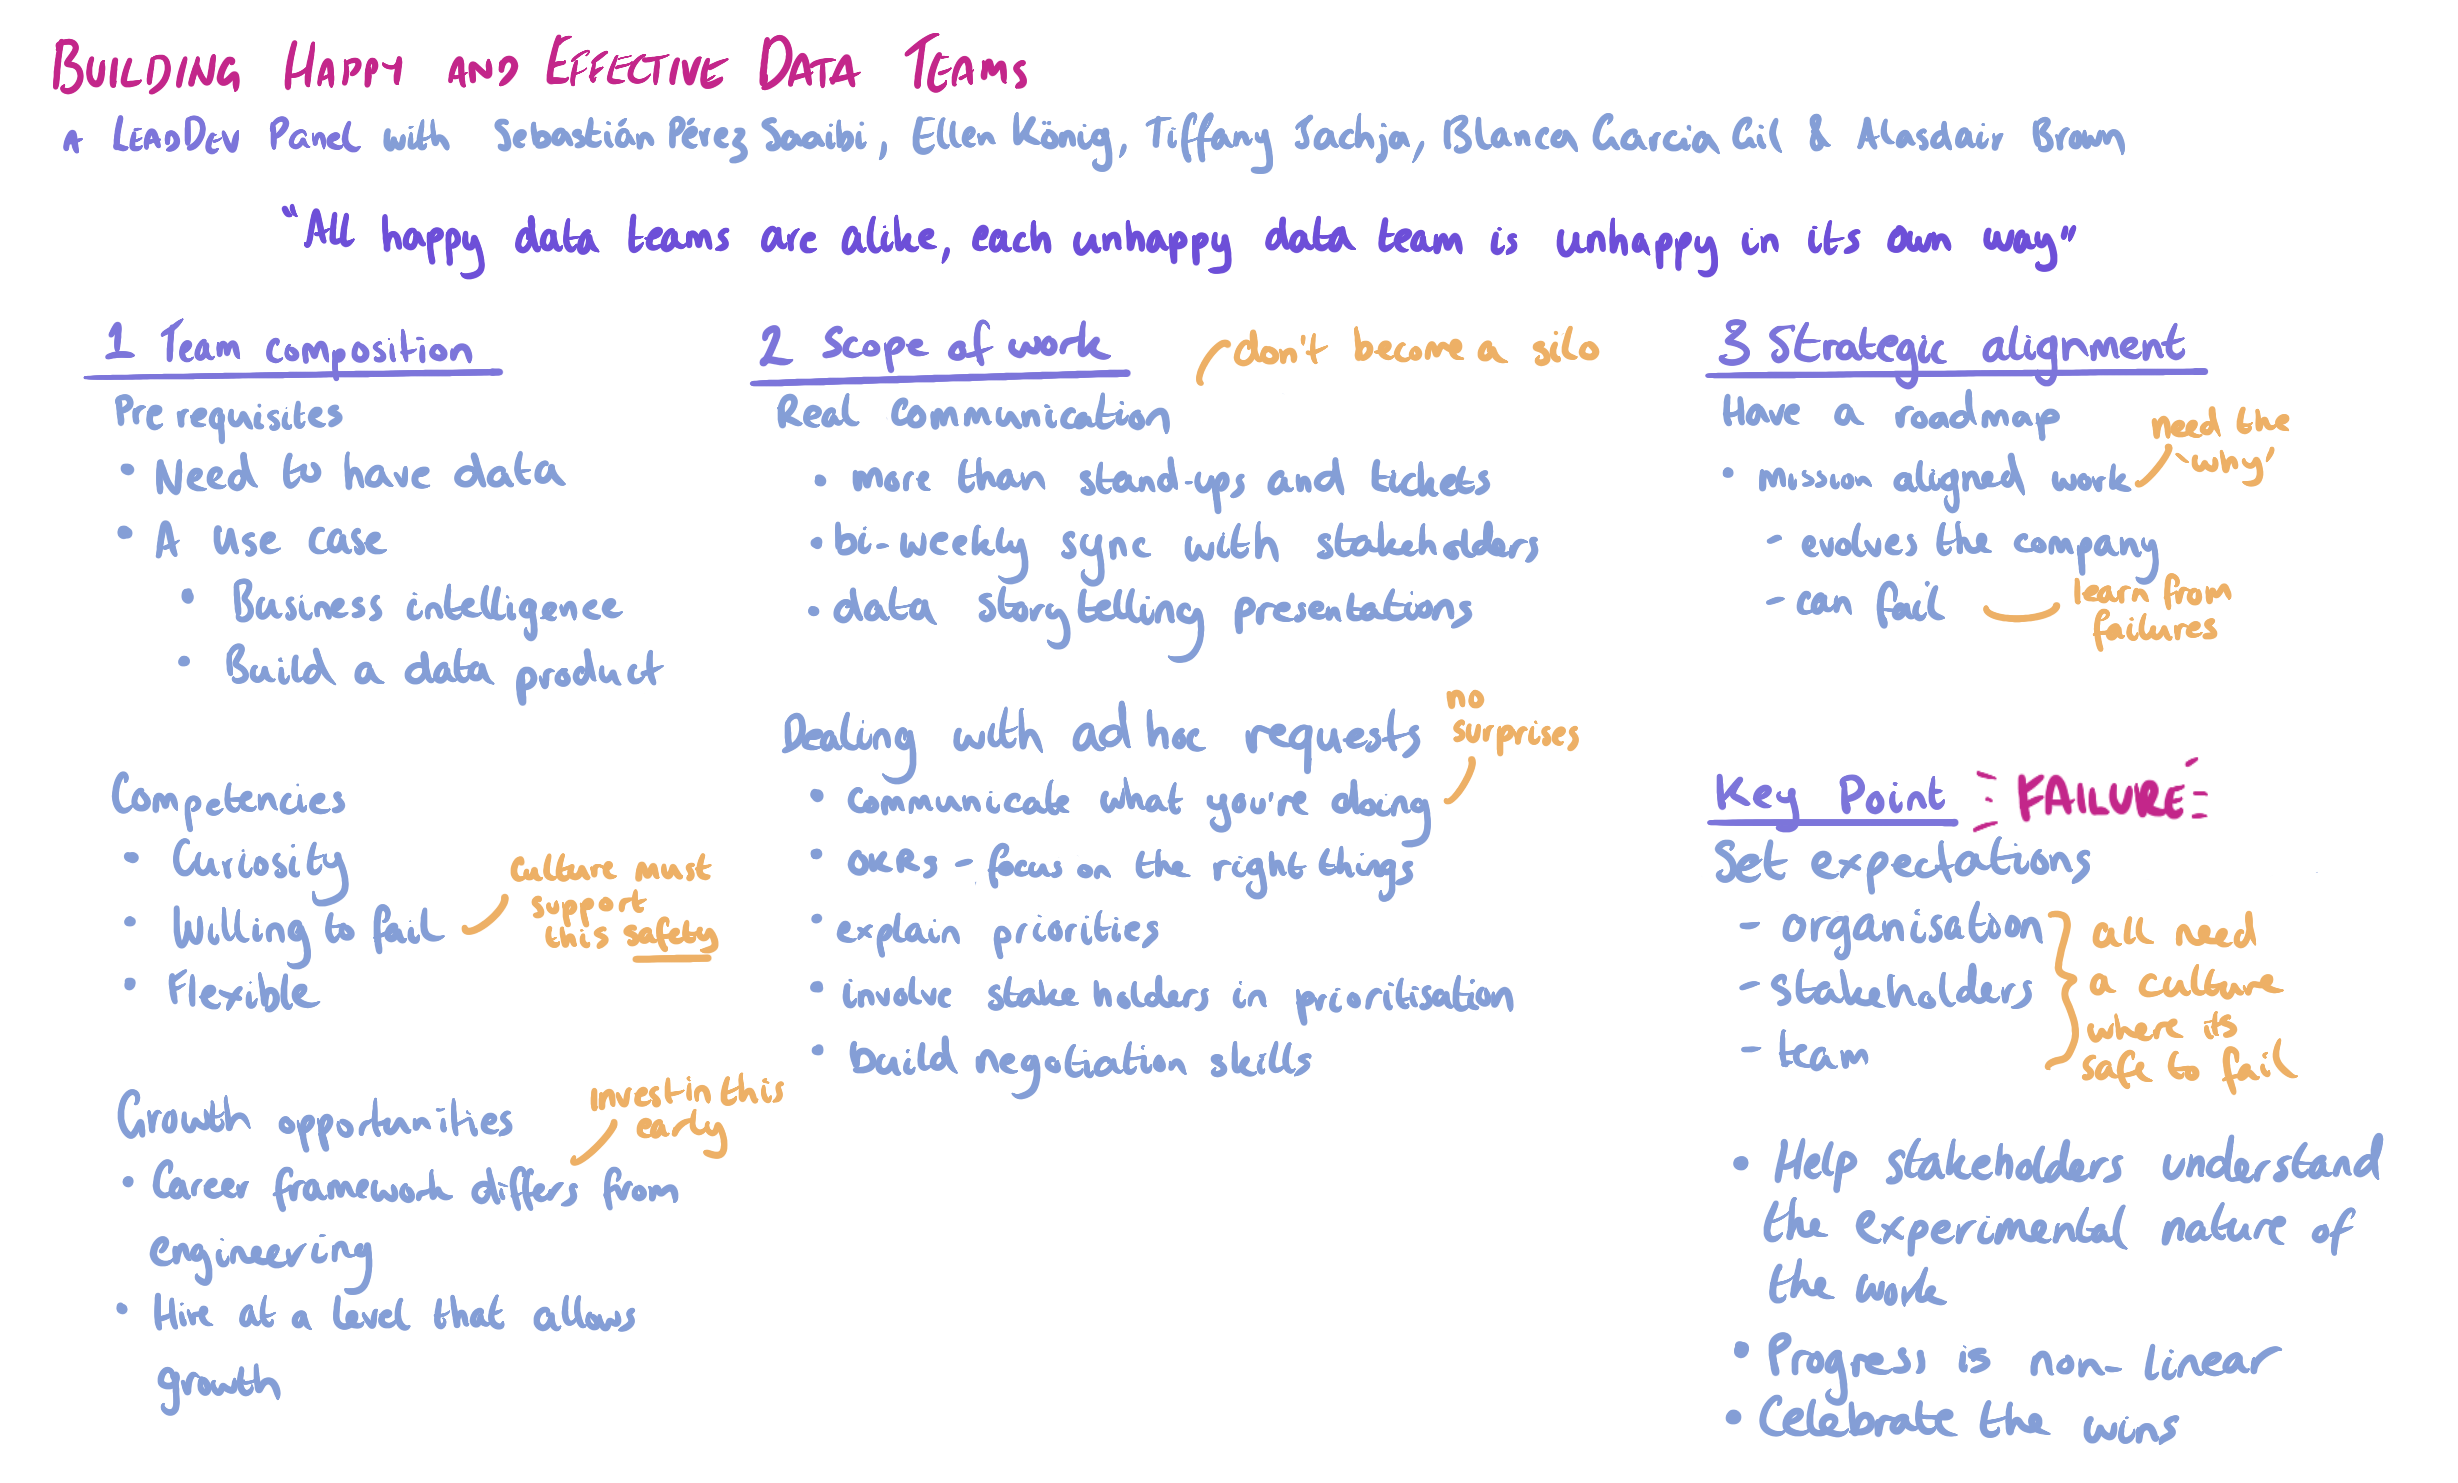 Notes for building happy and effective data teams